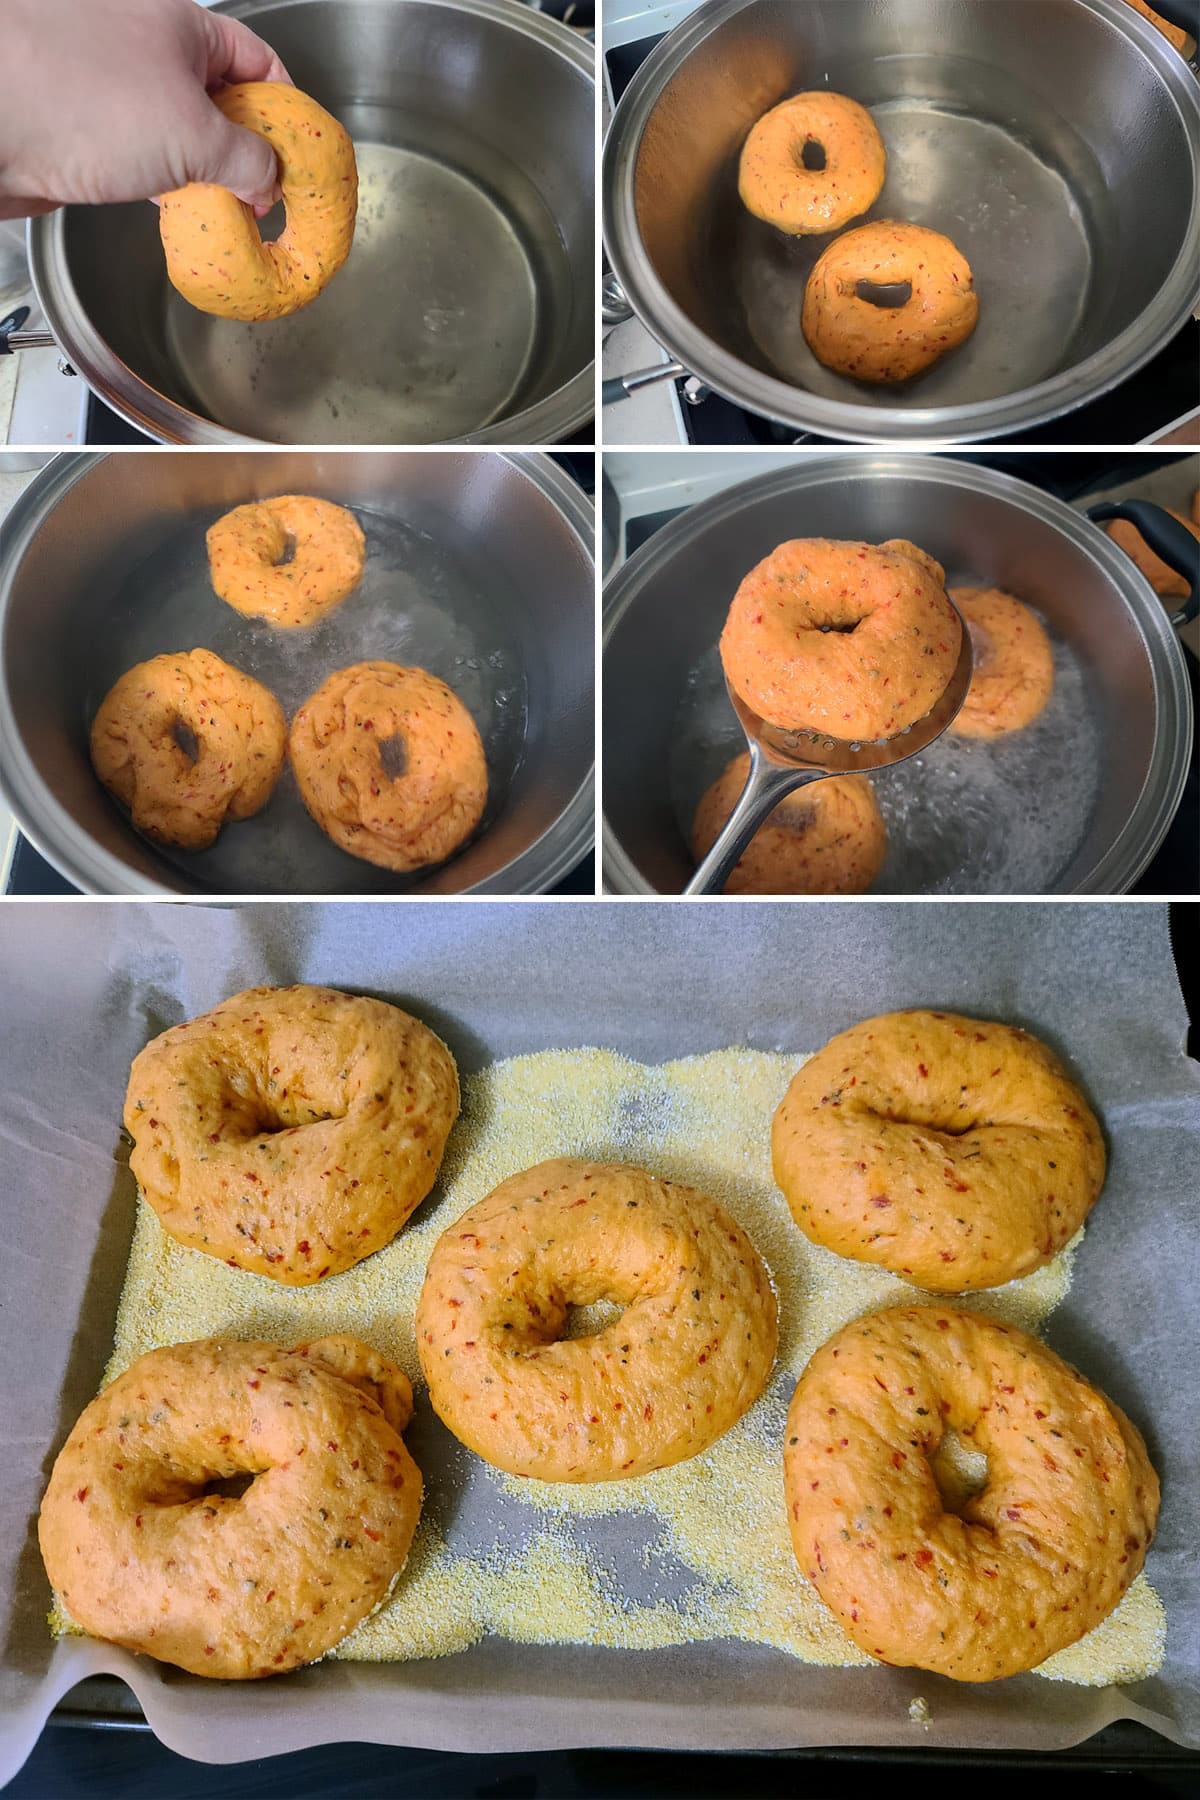 A 5 part image showing bagels boiling in water then being set on the prepared baking pan.